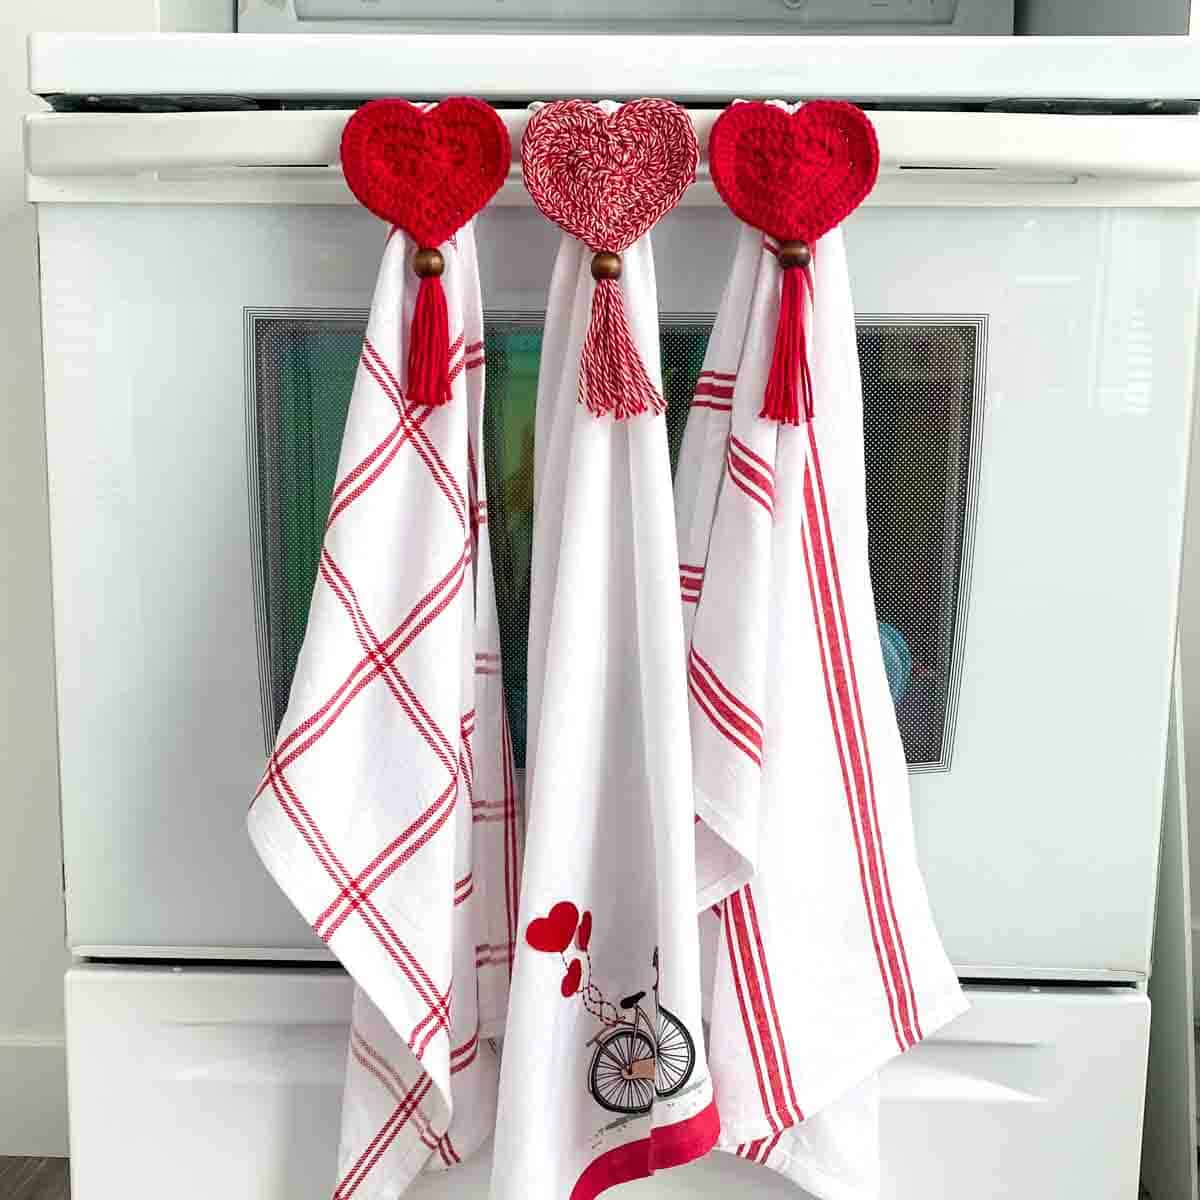 valentines dishtowels with heart crochet towel toppers hanging on an oven